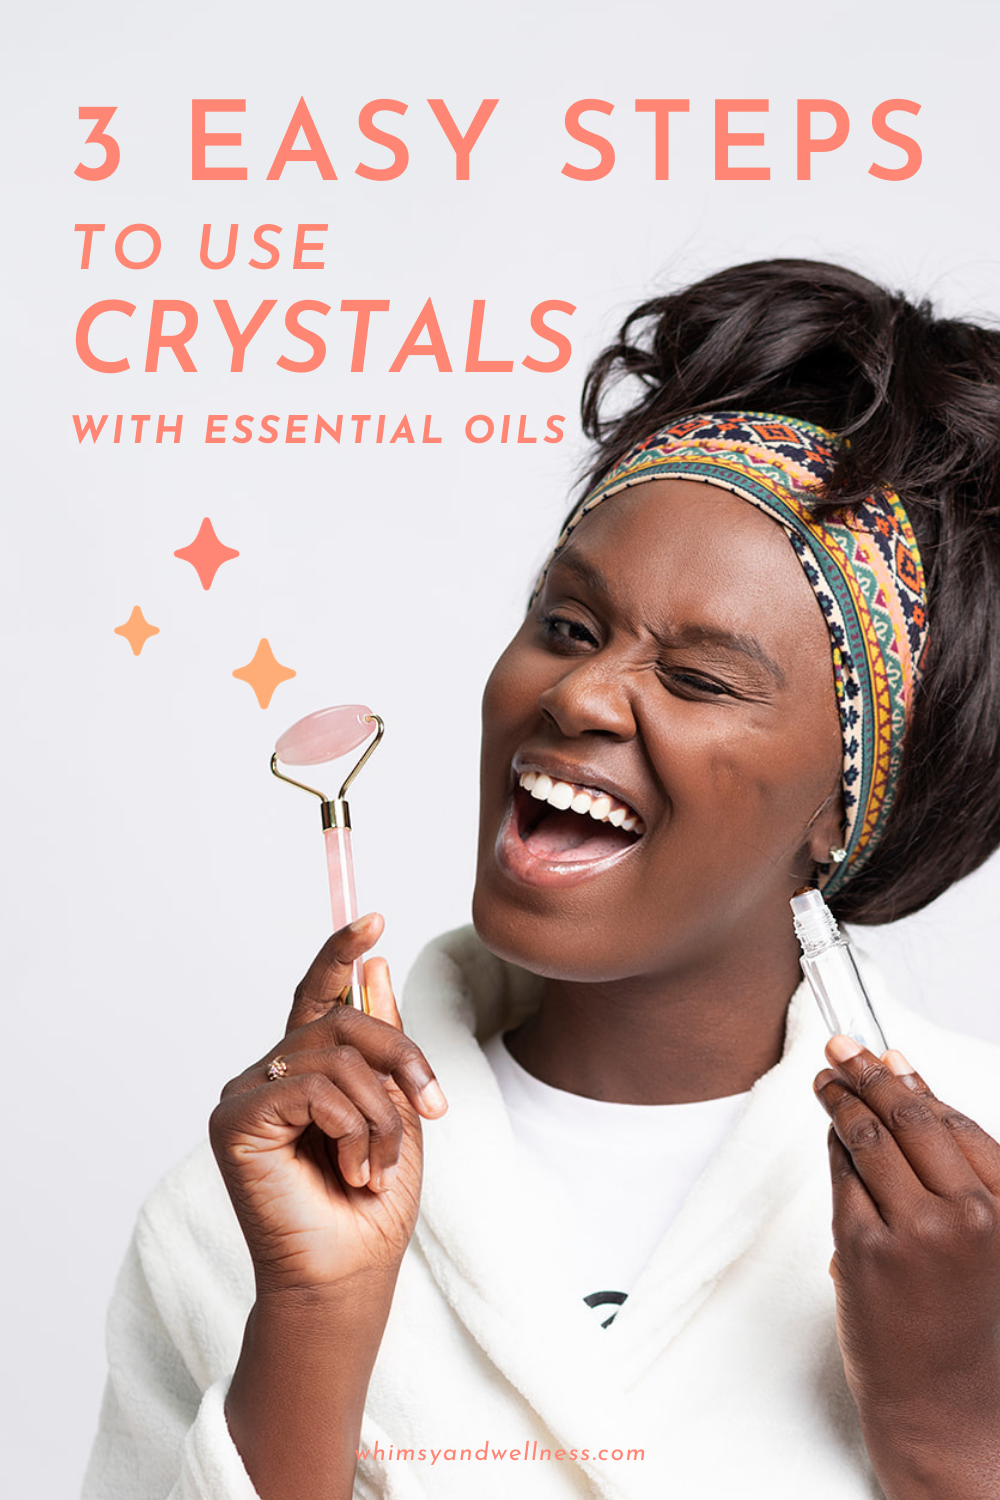 3 easy steps to use crystals with essential oils